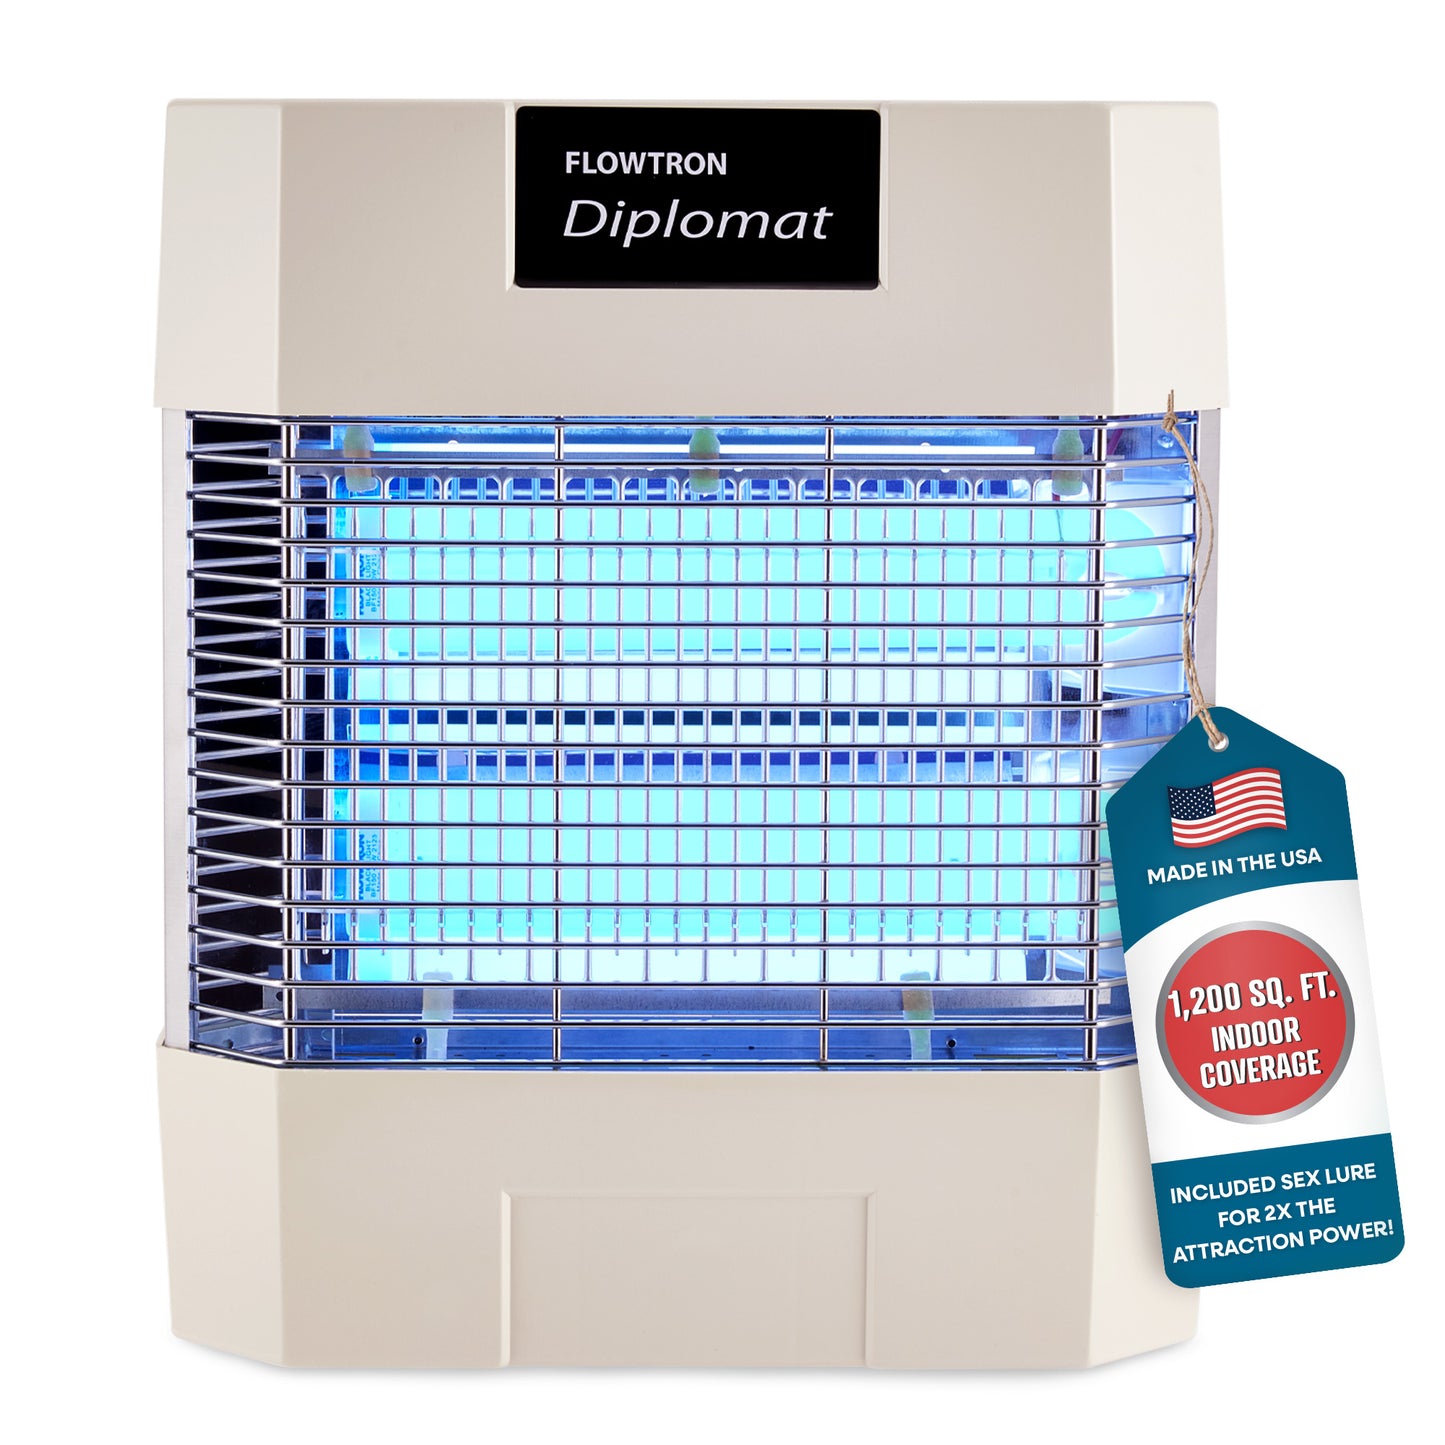 Flowtron 80W Indoor Commercial Bug Zapper, 1200 sq.ft coverage